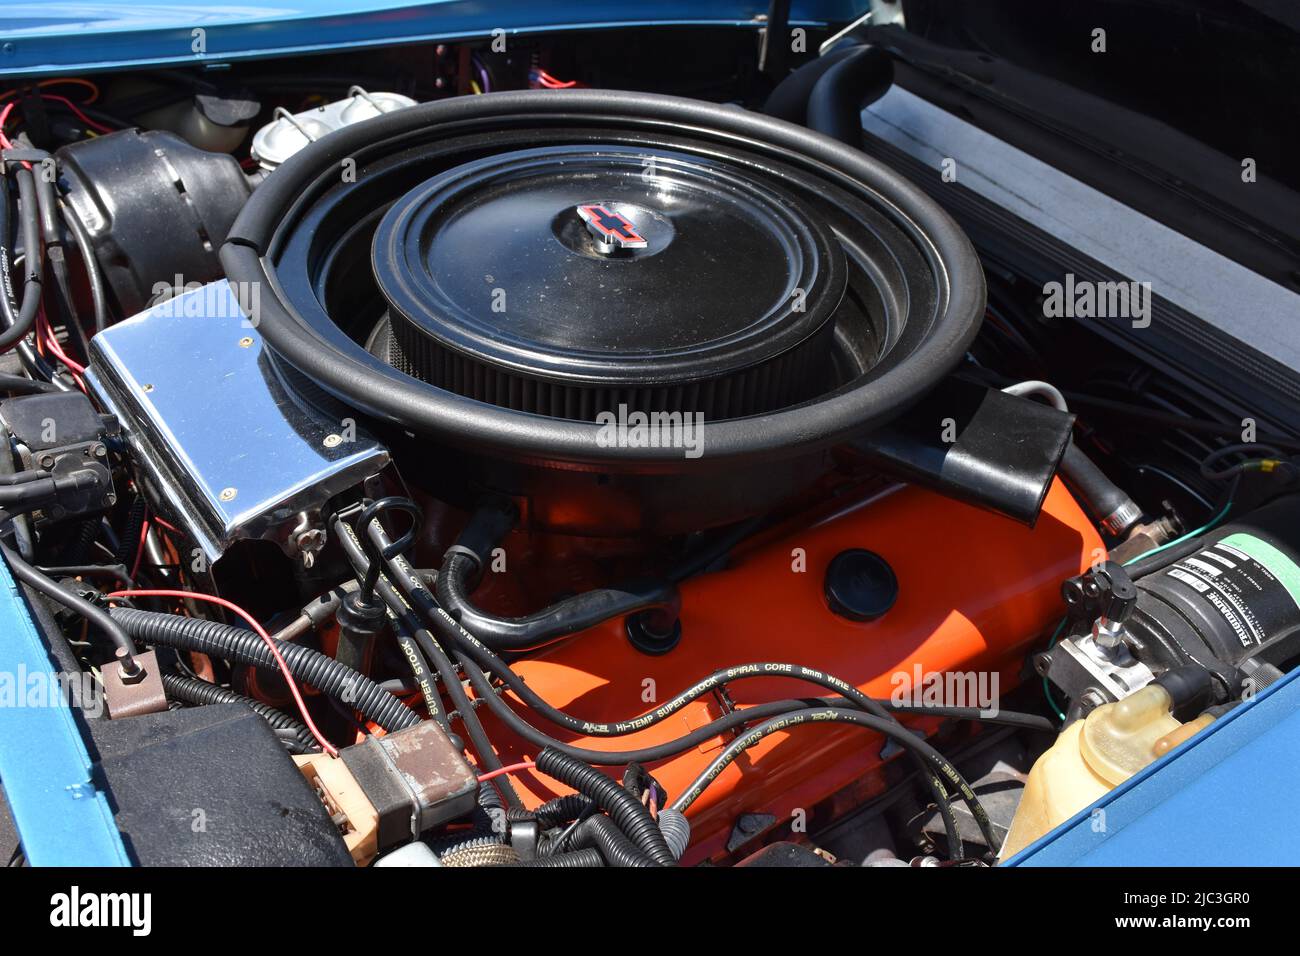 The 454 Engine of a 1974 Chevrolet Corvette on display at a car show. Stock Photo